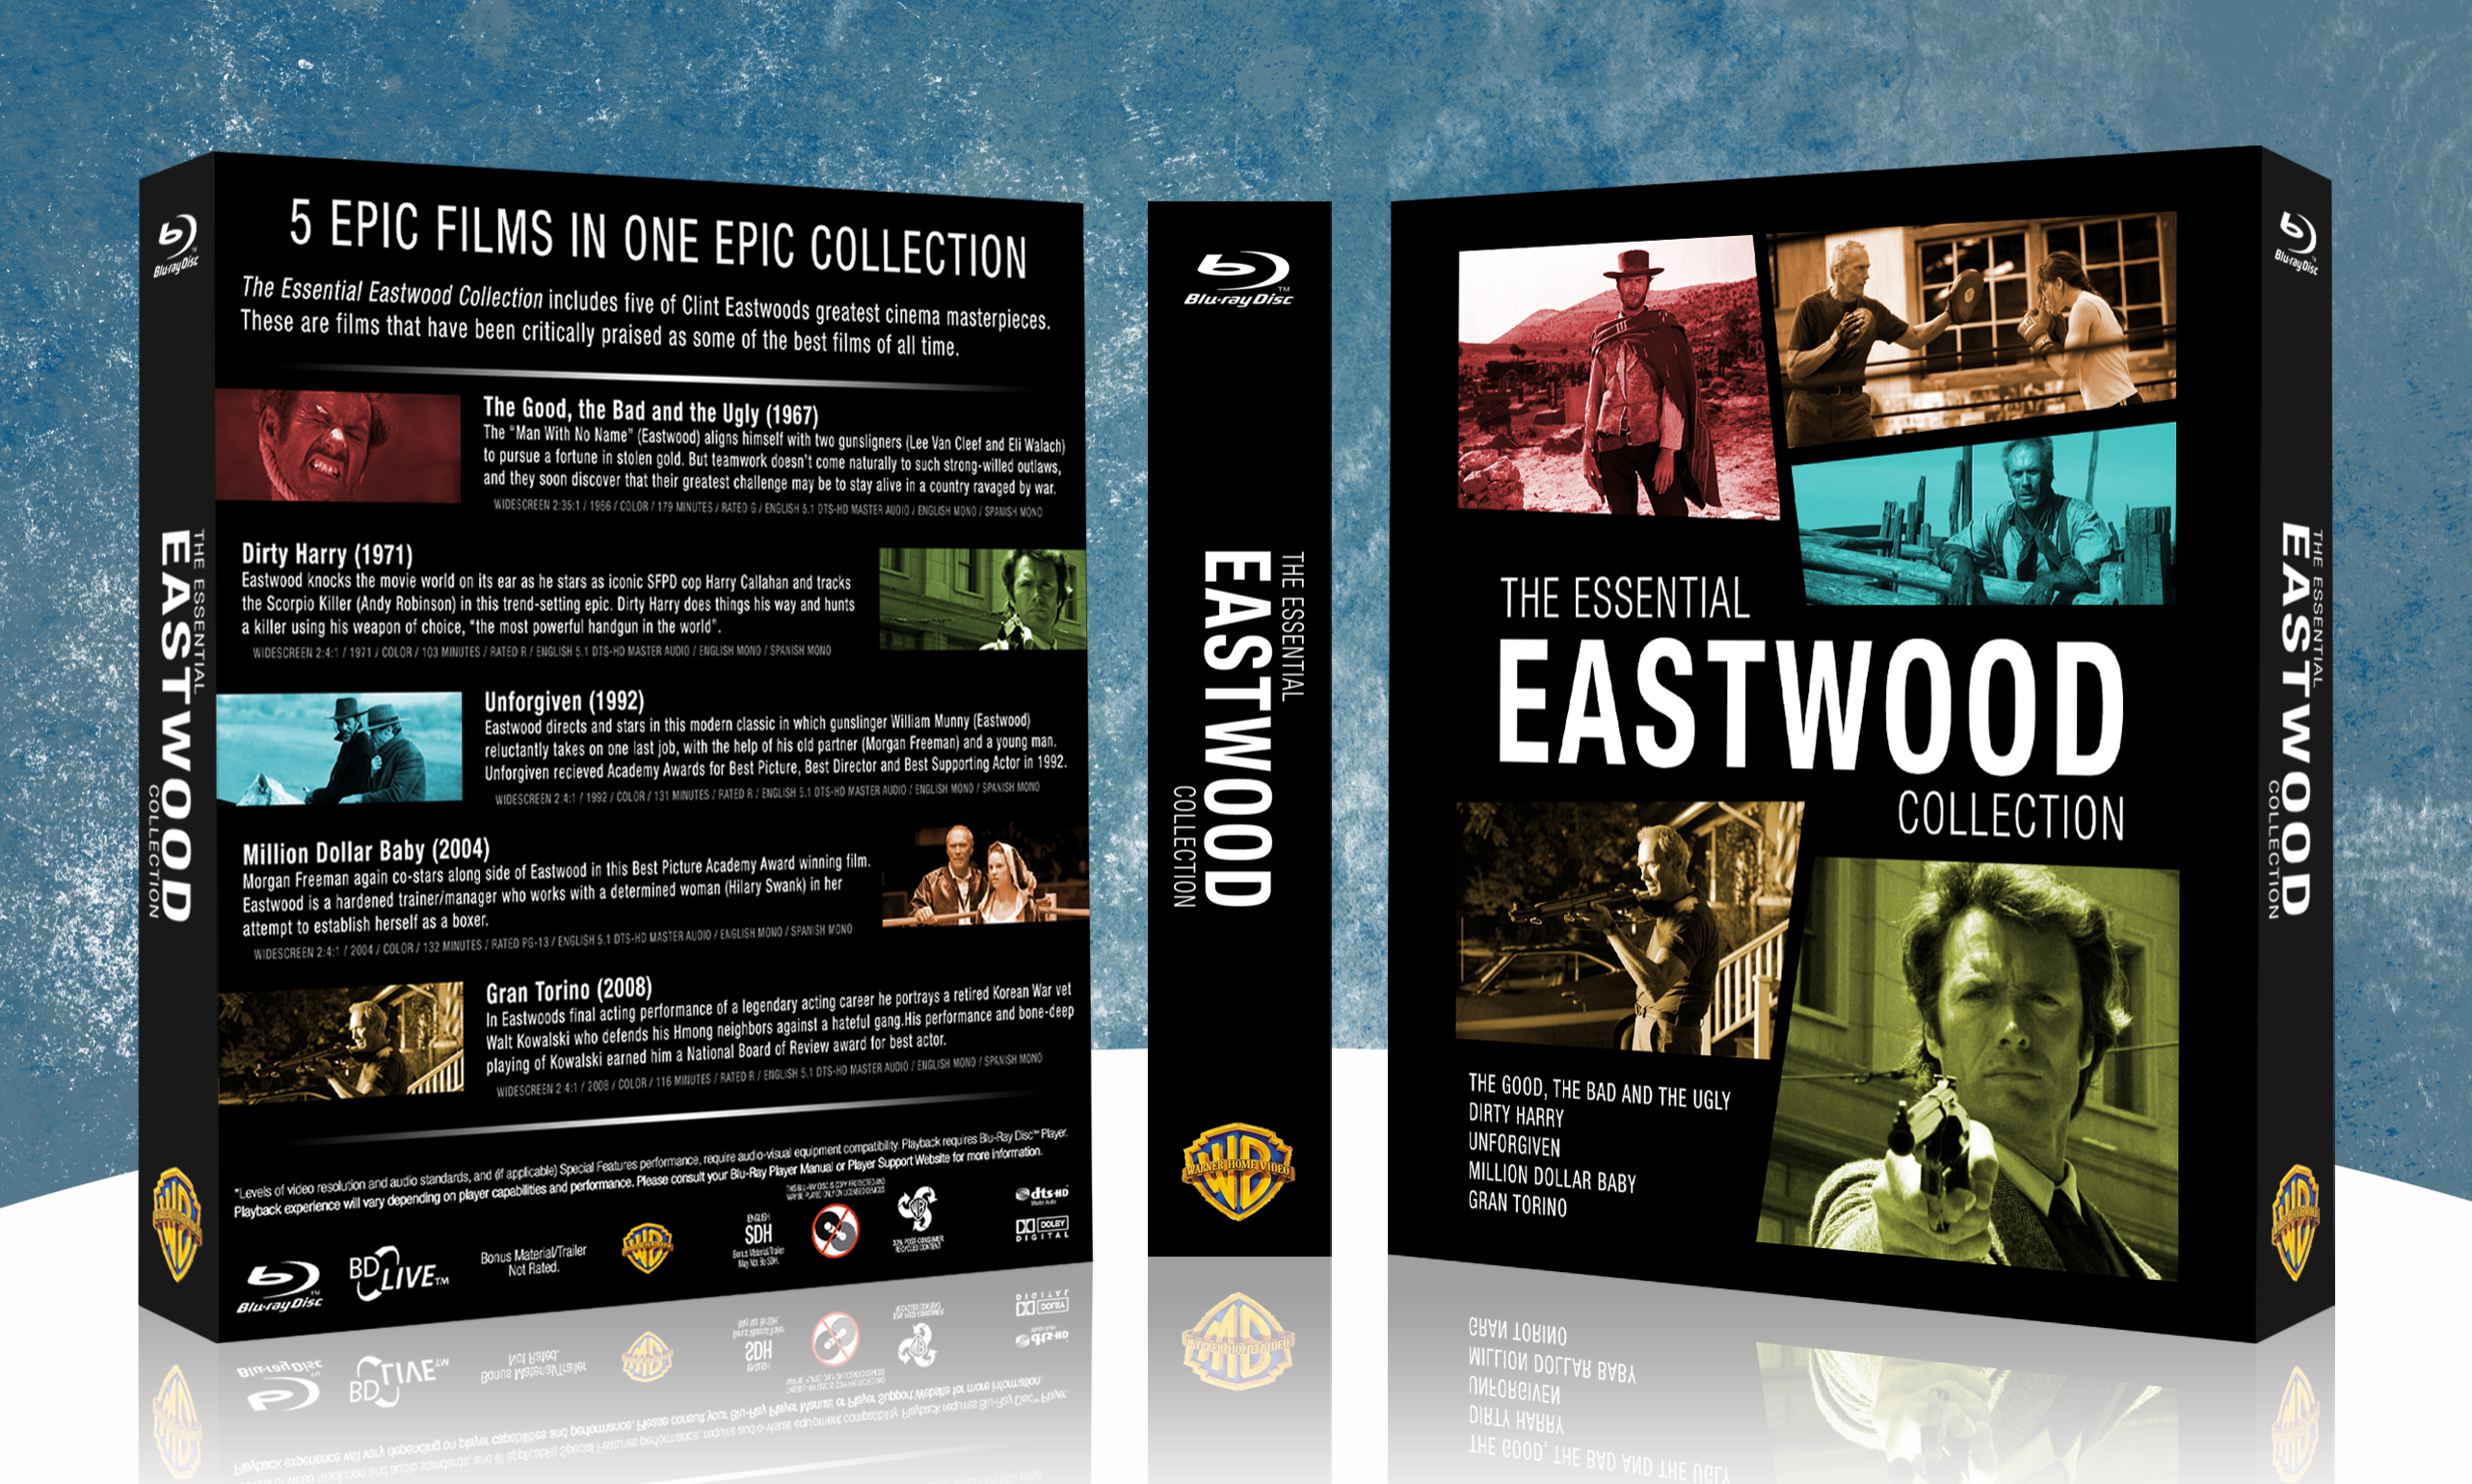 The Essential Eastwood Collection box cover